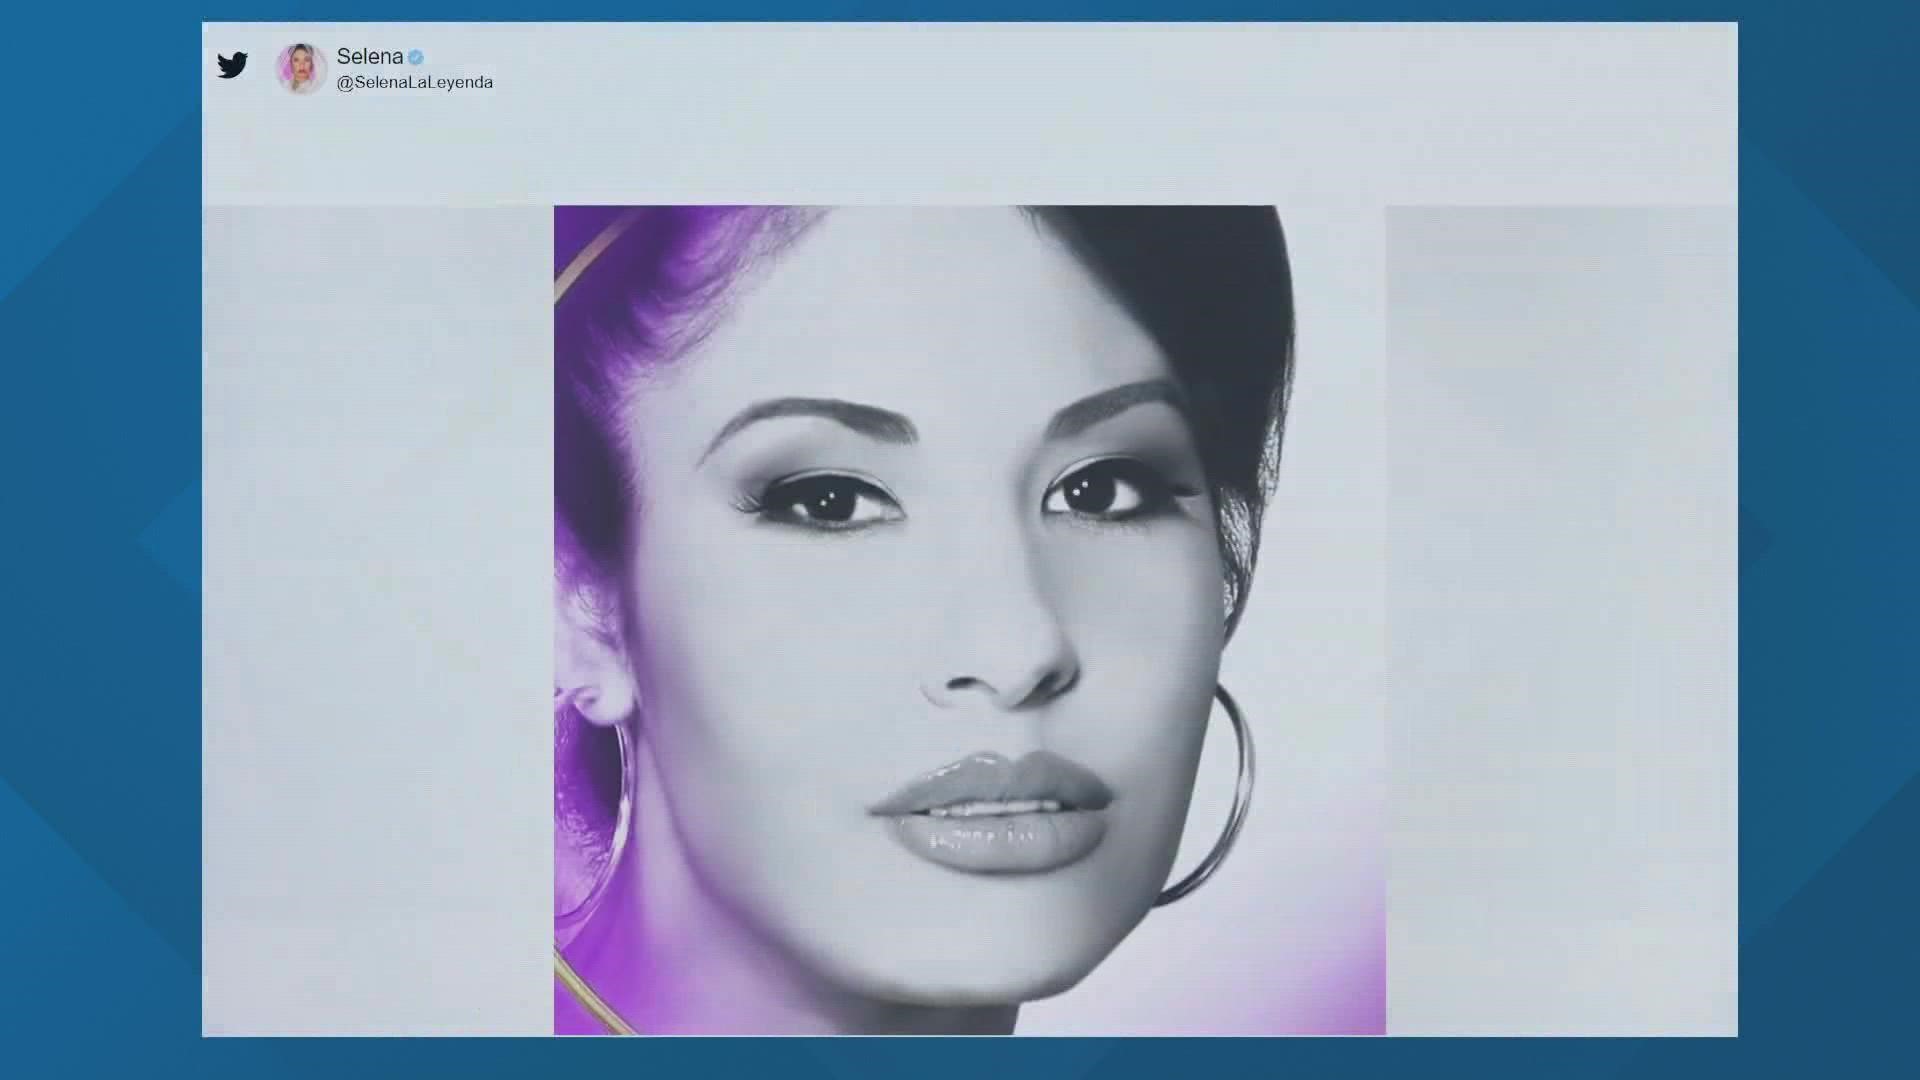 Selena's brother was able to use her voice through computers to make the new music, according to the family.